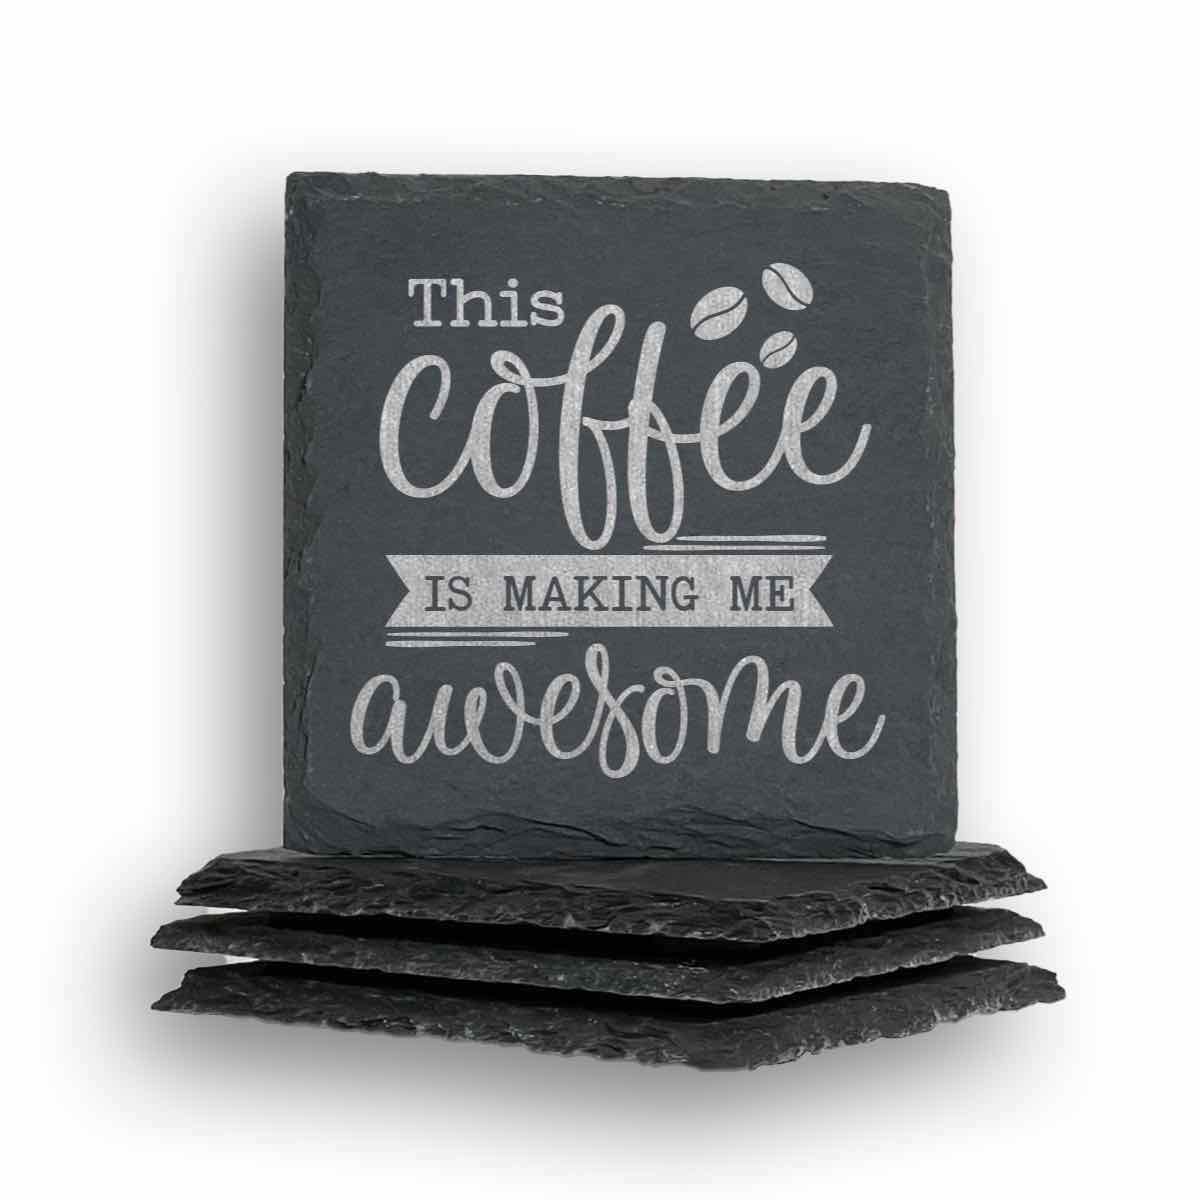 This Coffee Is Making Me Awesome Coaster